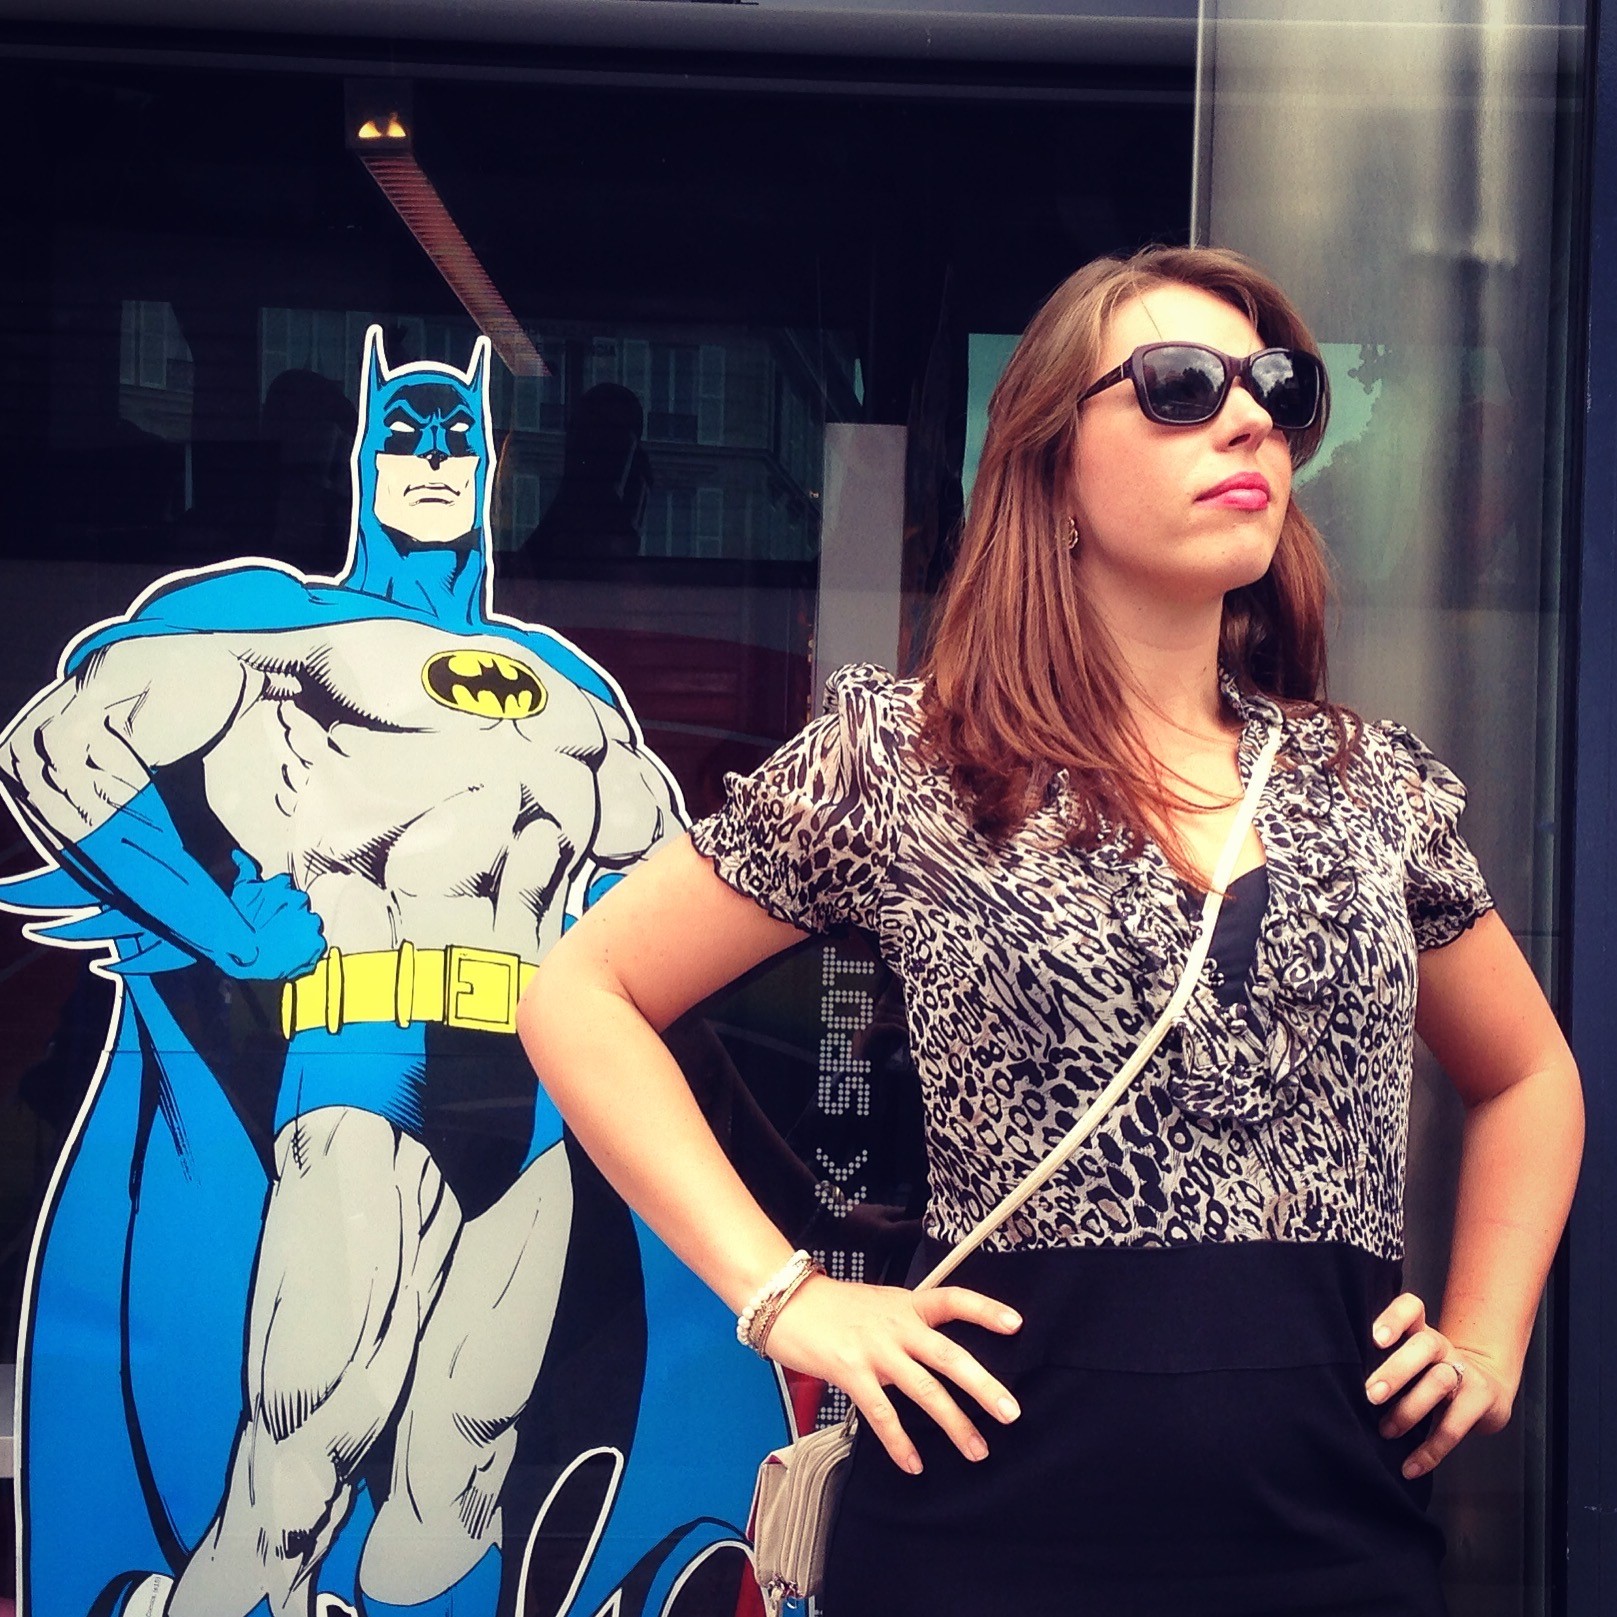 Woman with brown hair wearing sunglasses, short-sleeved black and white blouse, black skirt and beige shoulder bag, poses with hands on hips in front of cardboard cut-out of superhero Batman